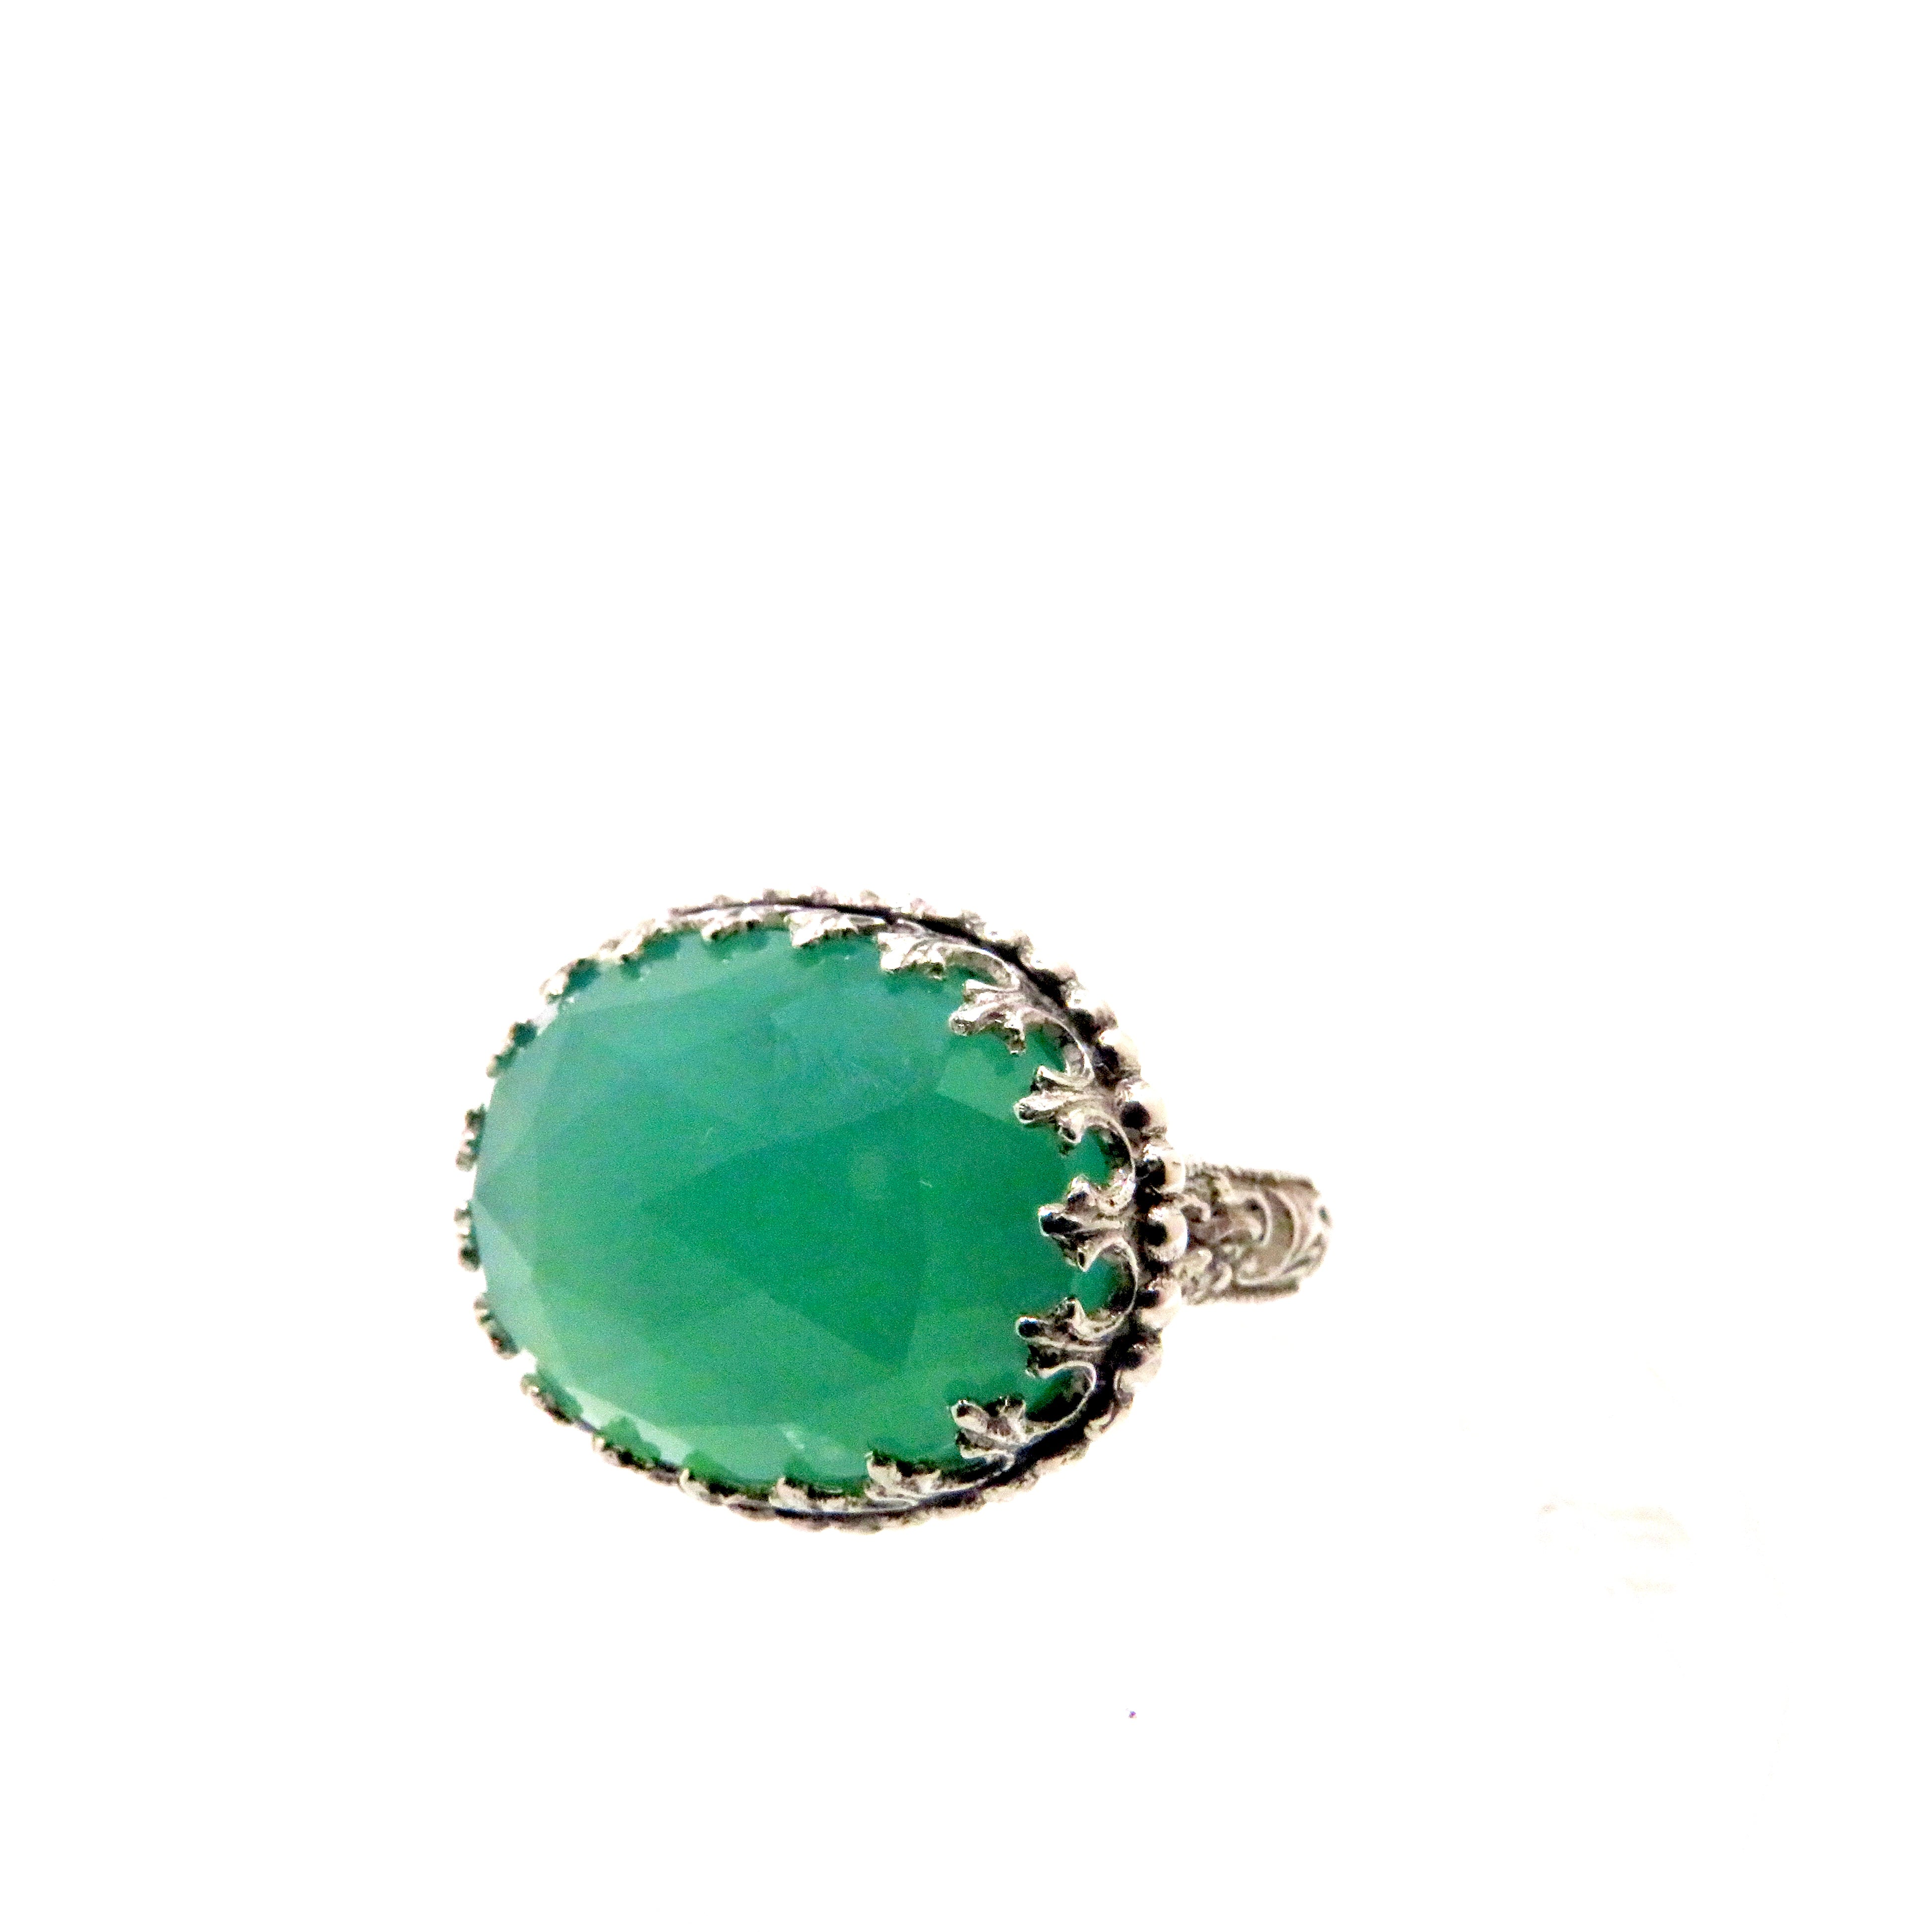 Chrysoprase and Sterling Silver Large Oval Ring